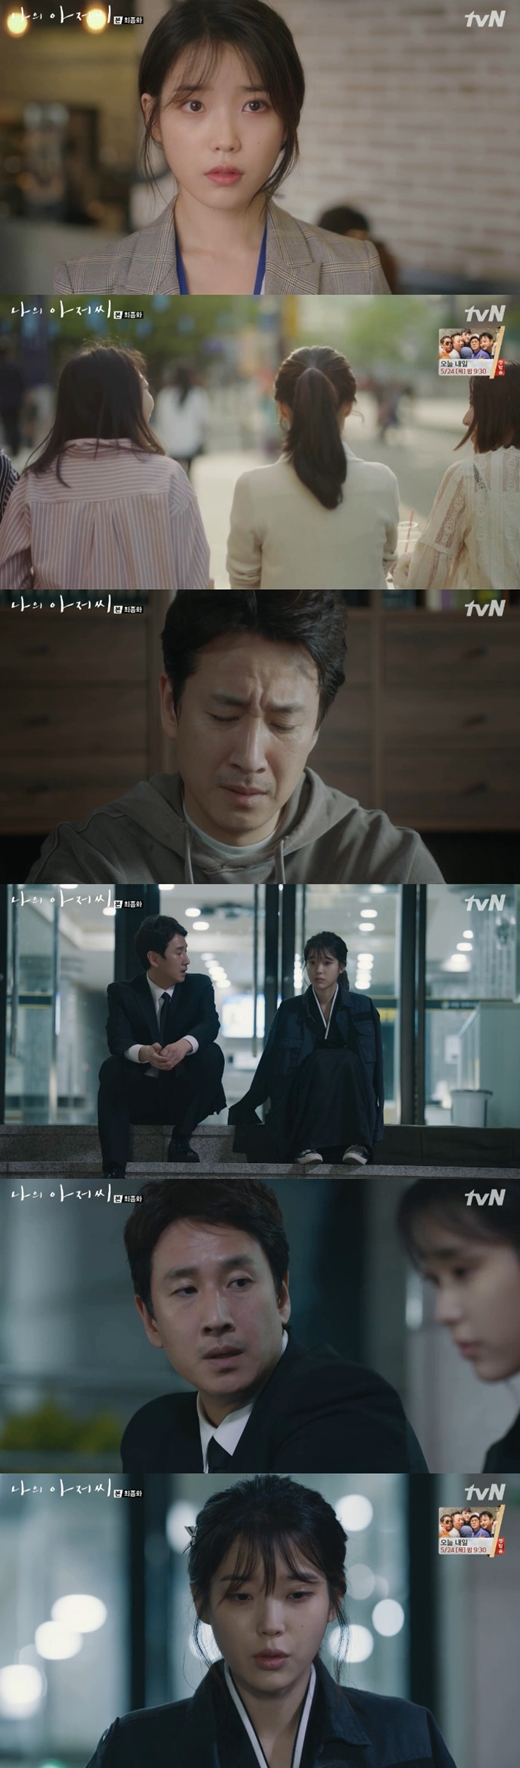 There were controversy, but there were many favorable reviews, with delicate productions and actors Hot Summer Days coming to life dramas for many viewers.On the 16th, cable channel tvN tree drama My Uncle (playplayed by Park Hae-young, directed by Kim Won-seok) ended with the 16th episode.My Uncle delicately depicted the situation in which the youthful IU, who is struggling in an unhappy life, changed by forming a relationship with Park Dong-hoon (Lee Sun Gyun).The last meeting repented of his mistakes, made a new start, and told the story of Ijian, who returned to ordinary life.My Uncle was at the center of controversy from the casting stage as well as the reality of the male and female protagonists in the early stage.Here, the scene of Jang Gi-yongs verbal abuse and assault on IU at the beginning of the drama was overly stimulating.The production team and the leading actors held an interim meeting to explain and explain the meaning of the work, and promised expectations for the remaining rounds.Since then, My Uncle has drawn a close picture of relationship changes centering on Lee Sun Gyun and IU.The story was centered on the process of embracing and helping the IU by mature and reliable adult Lee Sun Gyun, and in addition to this, he dealt with the lives of the surrounding people centered on Song Sae-byeok and Park Ho-san and gave a calm impression and laughter at the same time.The actors Hot Summer Days also added depth as they went through the episode: IU drew a weary woman Ijian who was in a swamp of misfortune when she stood in front of the camera with a stranger.He also met Lee Sun Gyun and showed a stable process of struggling and growing.Lee Sun Gyun showed the truth of a serious and mature adult, not the Chadonam or comic character that he had shown before.In addition, Song Sae-byeok, who was in the first challenge of the drama, and Park Ho-san, who was reborn as a popular actor, led the drama together, and Ijia, who was a special appearance but played the drama until the end, also showed impressive performancesMy Uncle had a clear controversy and noise, but steadily high ratings, topicality, and favorable reviews of viewers coexisted.My Uncle, which has been stretched out without losing its strength to the end with a solid plot, has remained a life drama for many viewers.